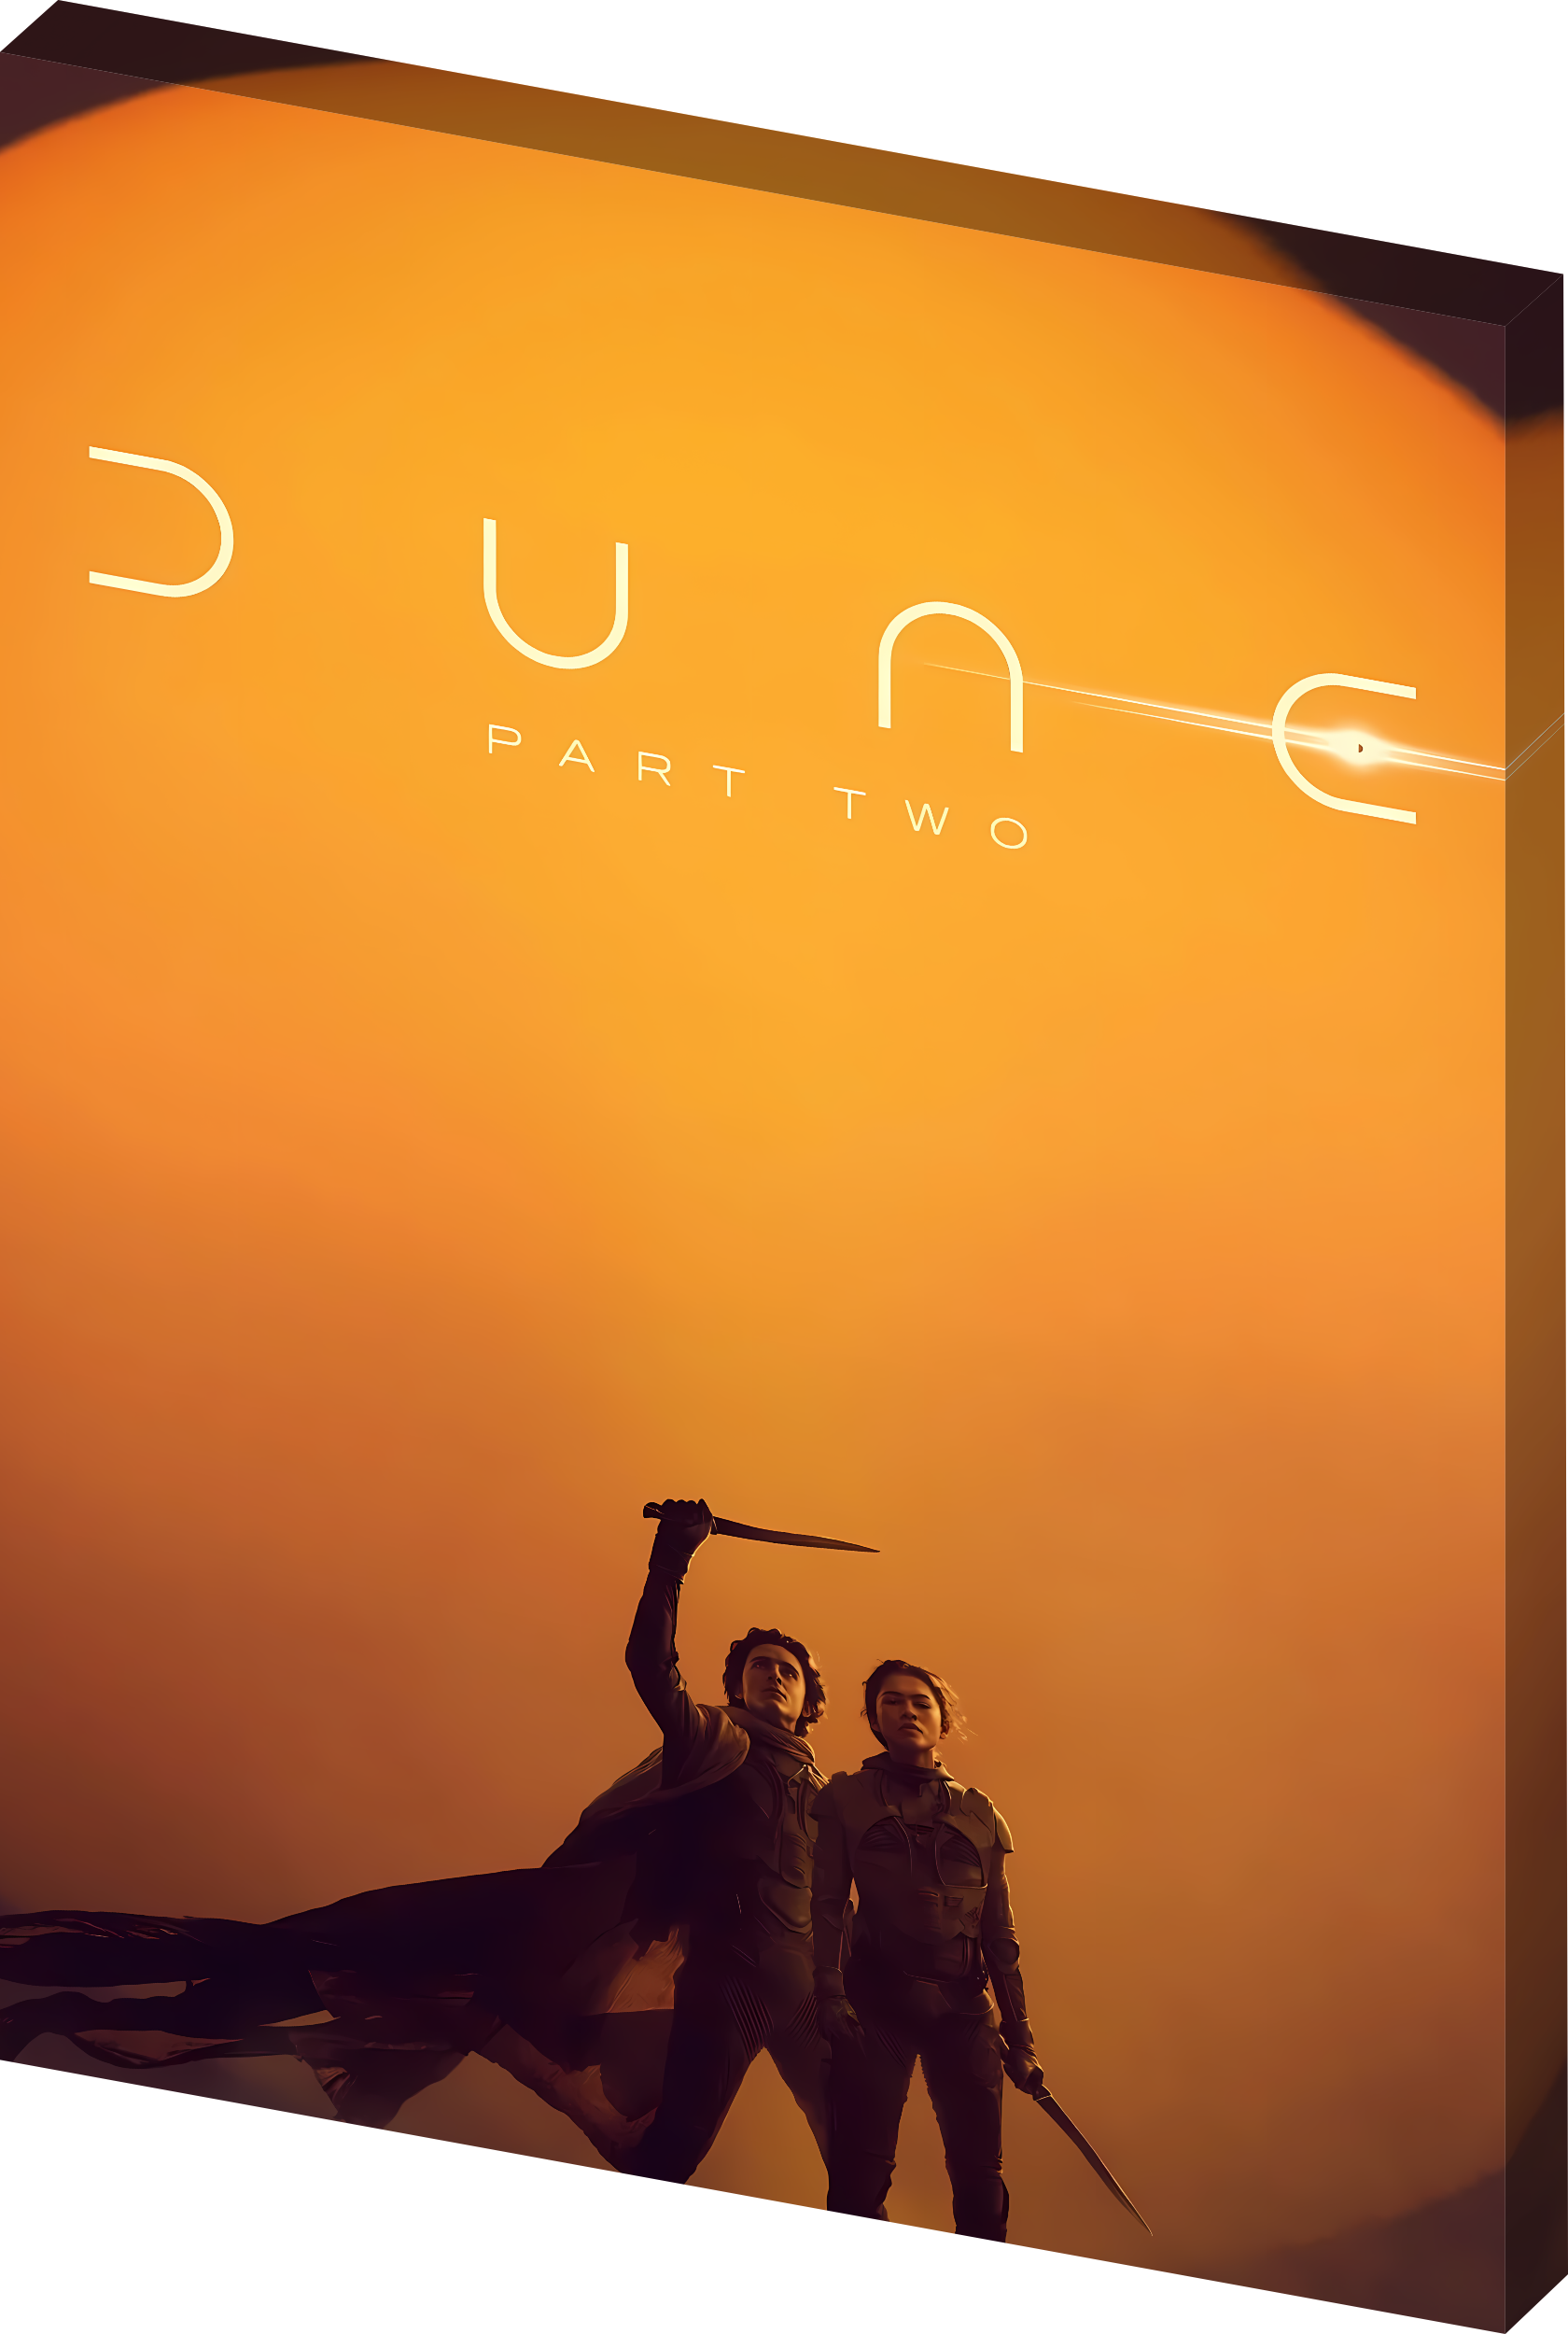 Dune Part 2 wall art for sale